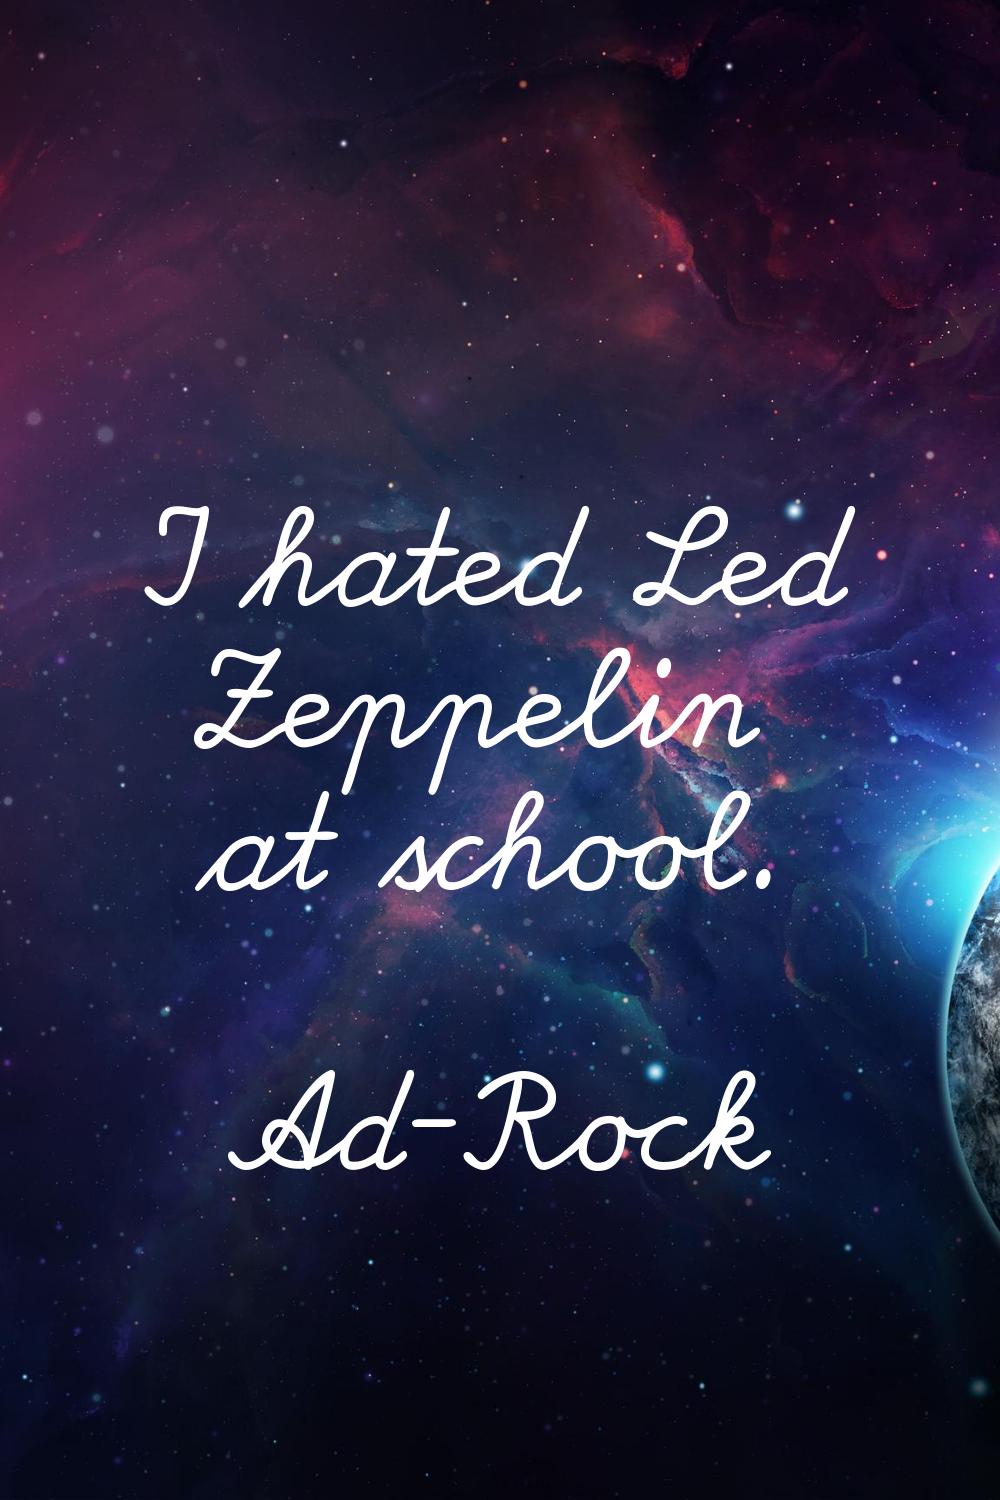 I hated Led Zeppelin at school.